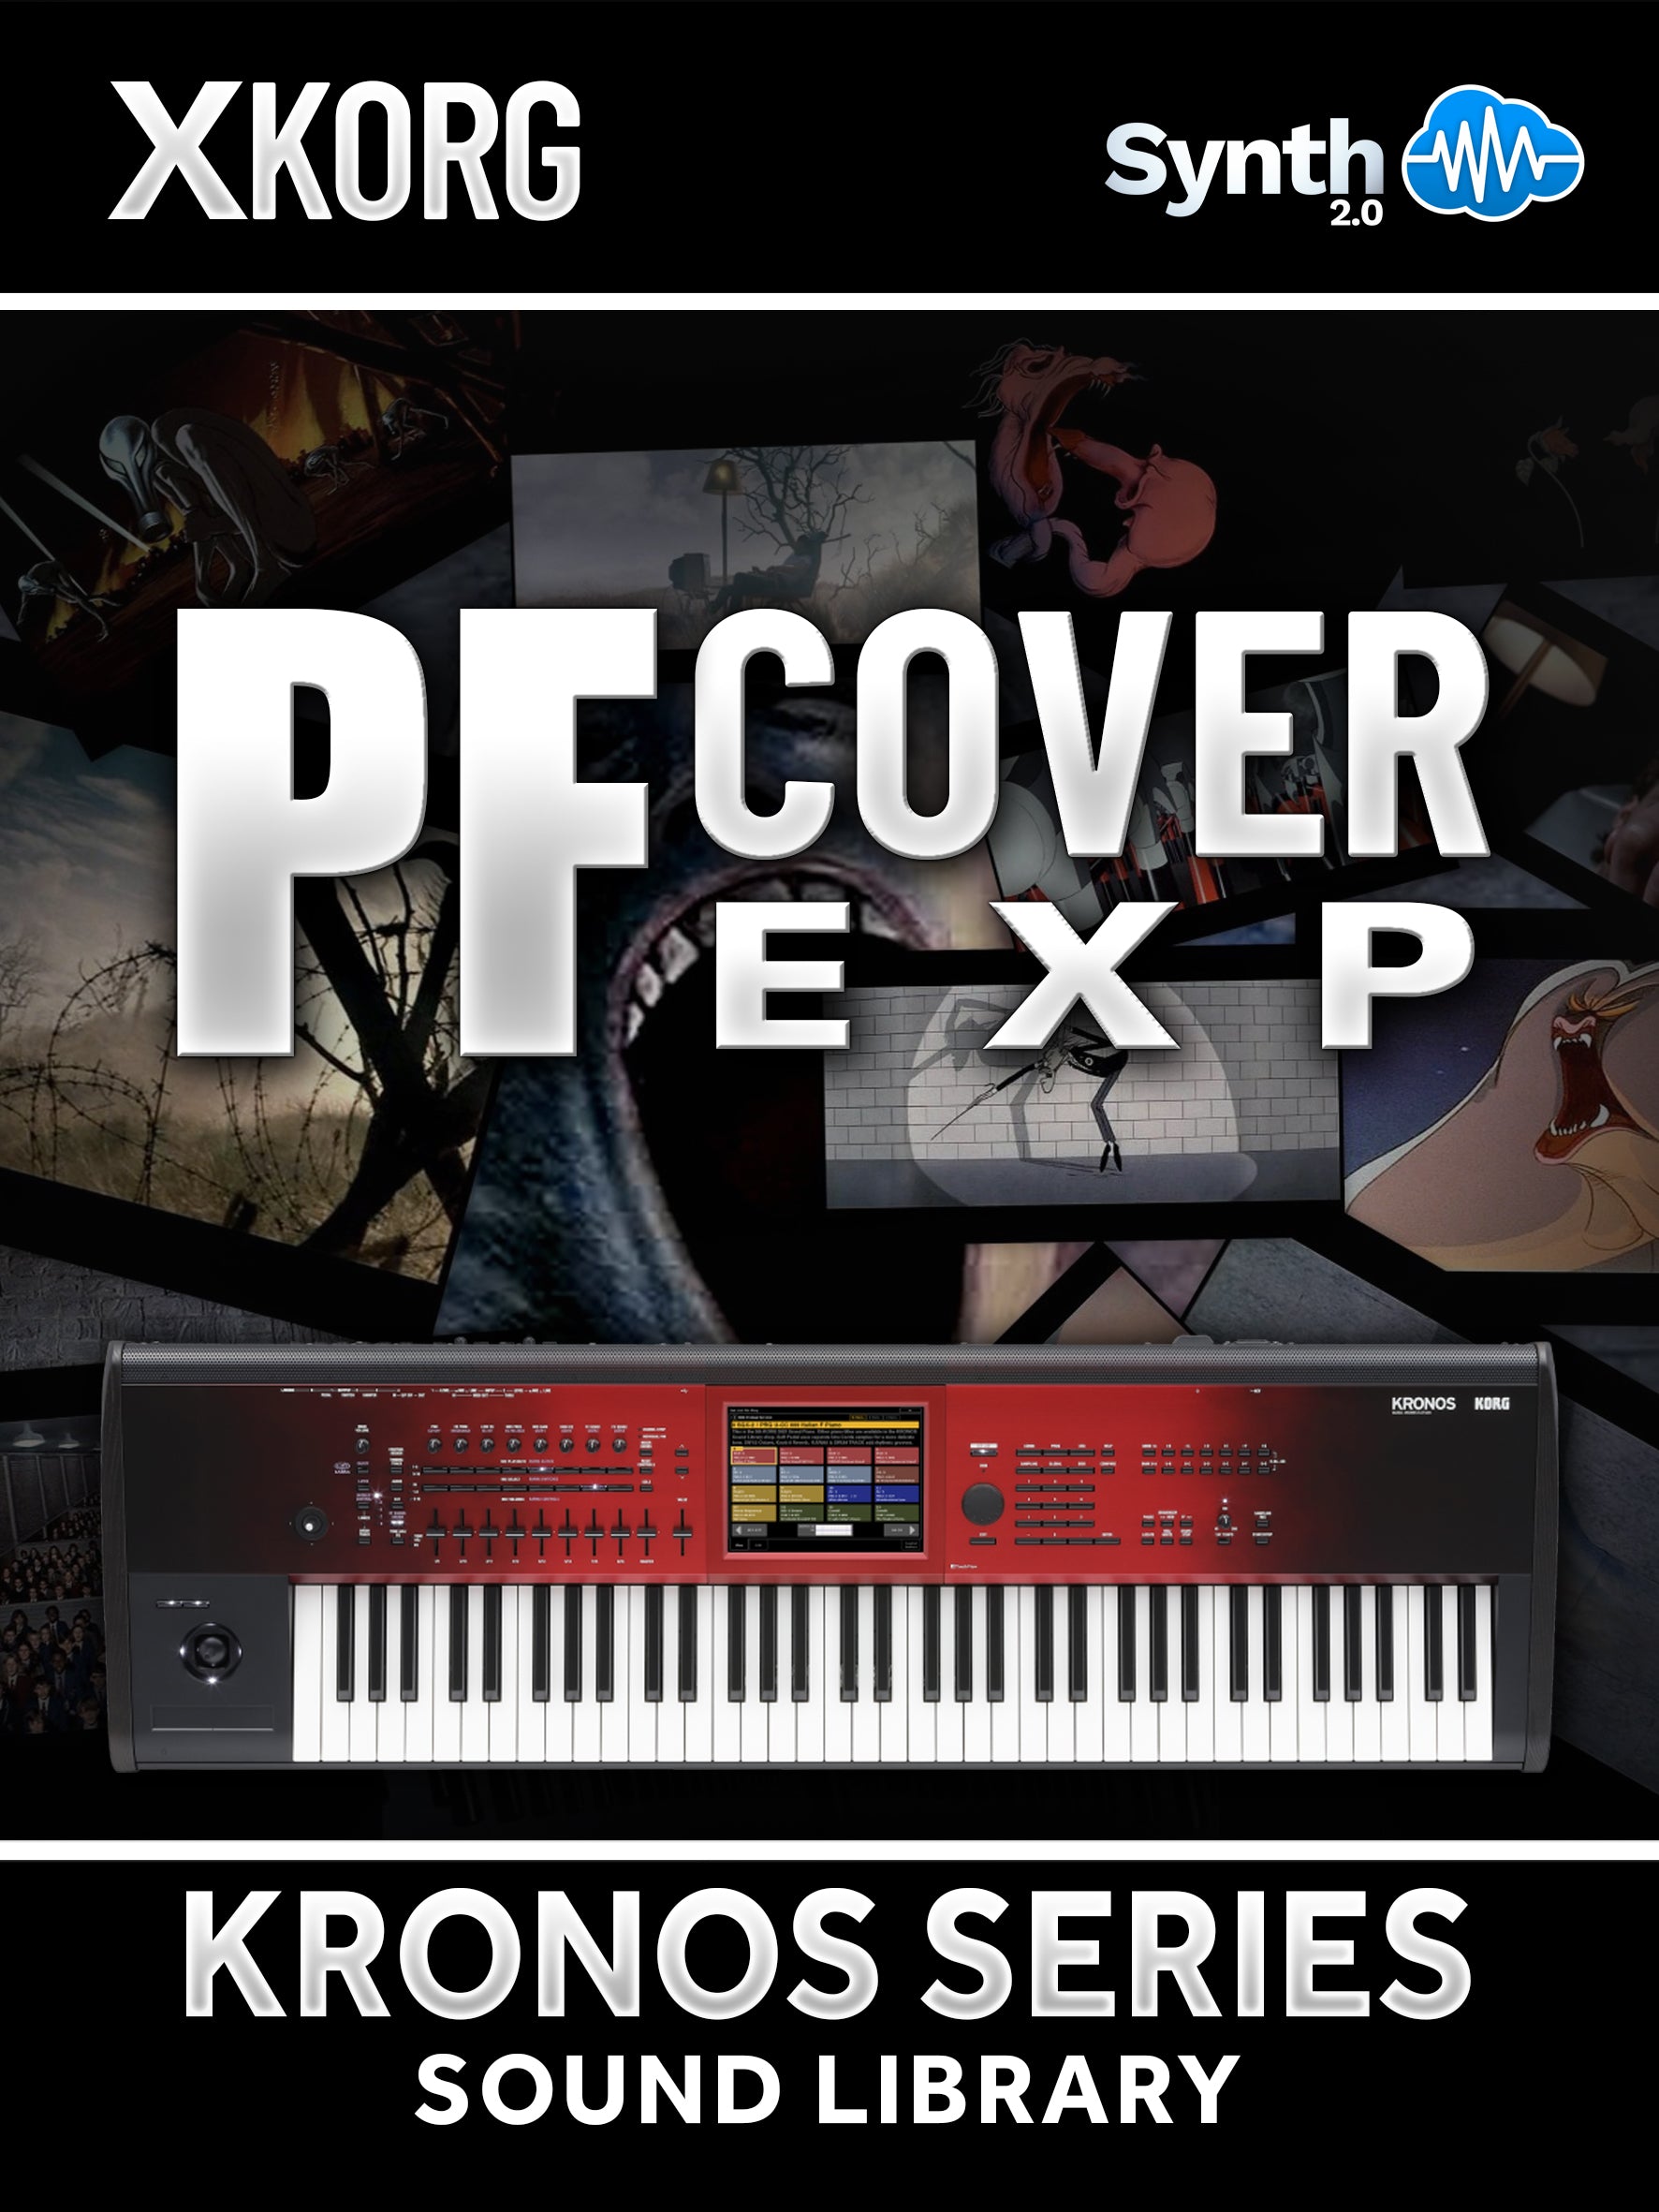 SCL183 - ( Bundle ) - PF Cover EXP + One Vision Cover EXP - Korg Kronos Series